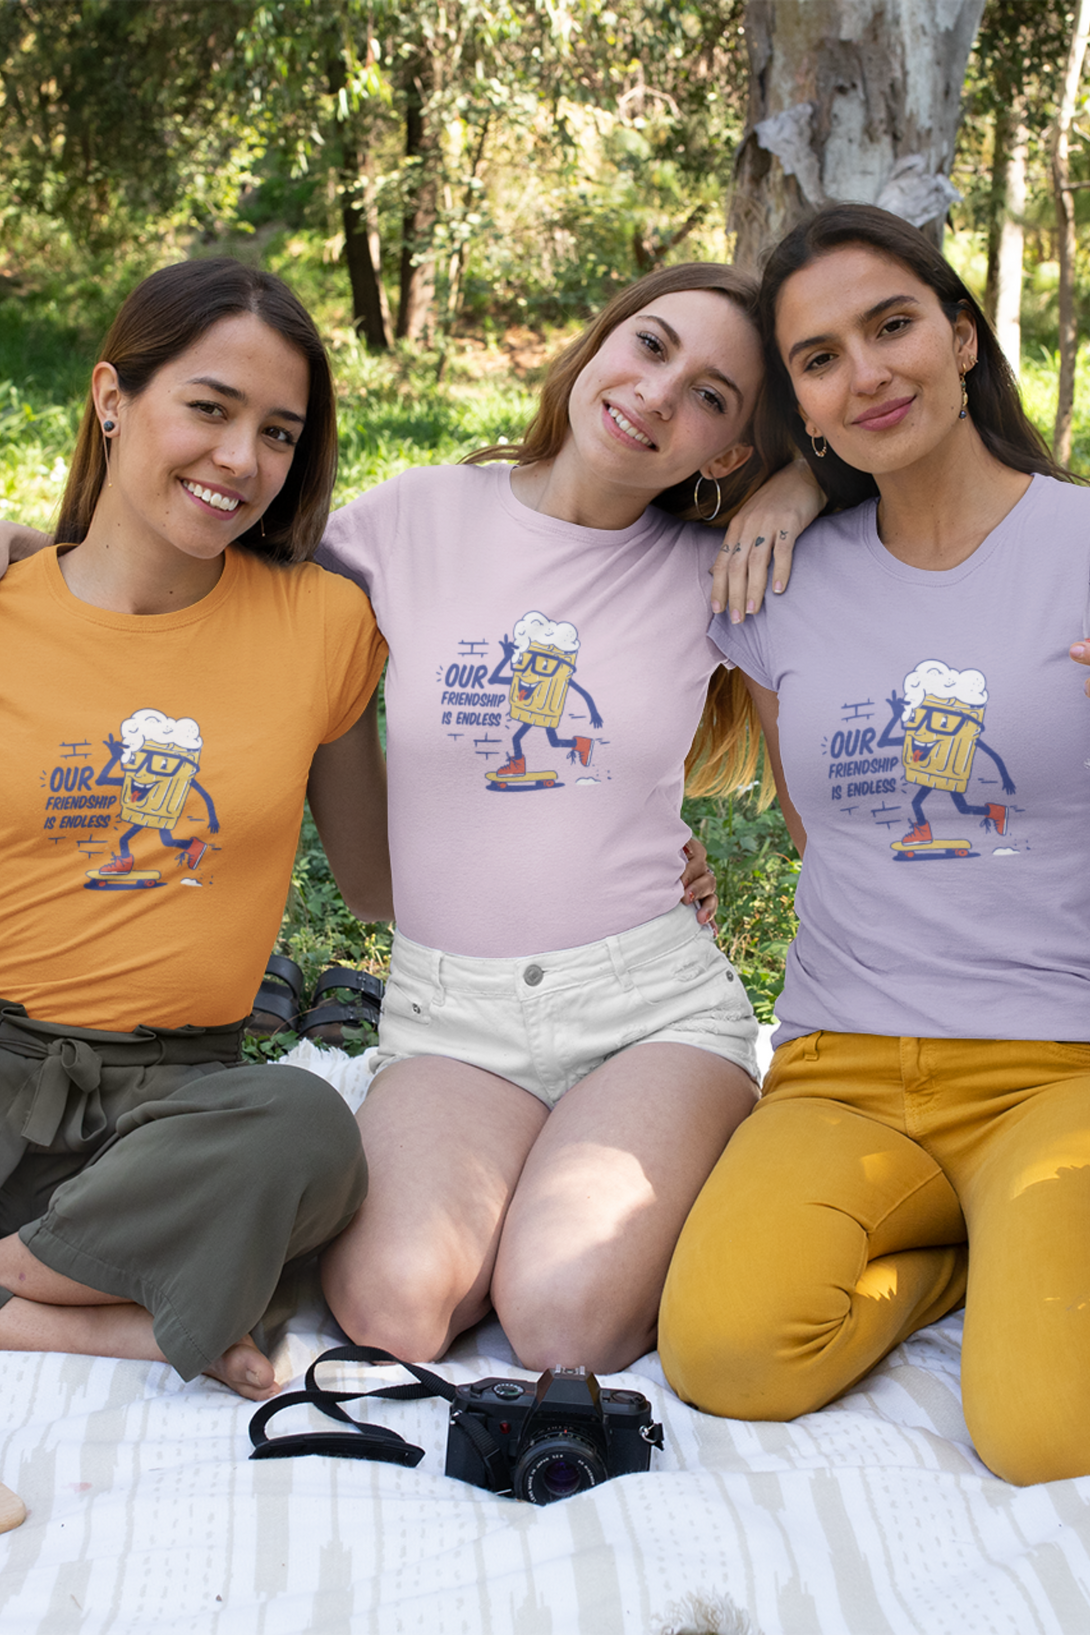 Our Friendship Is Endless Printed T-Shirt For Women - WowWaves - 4